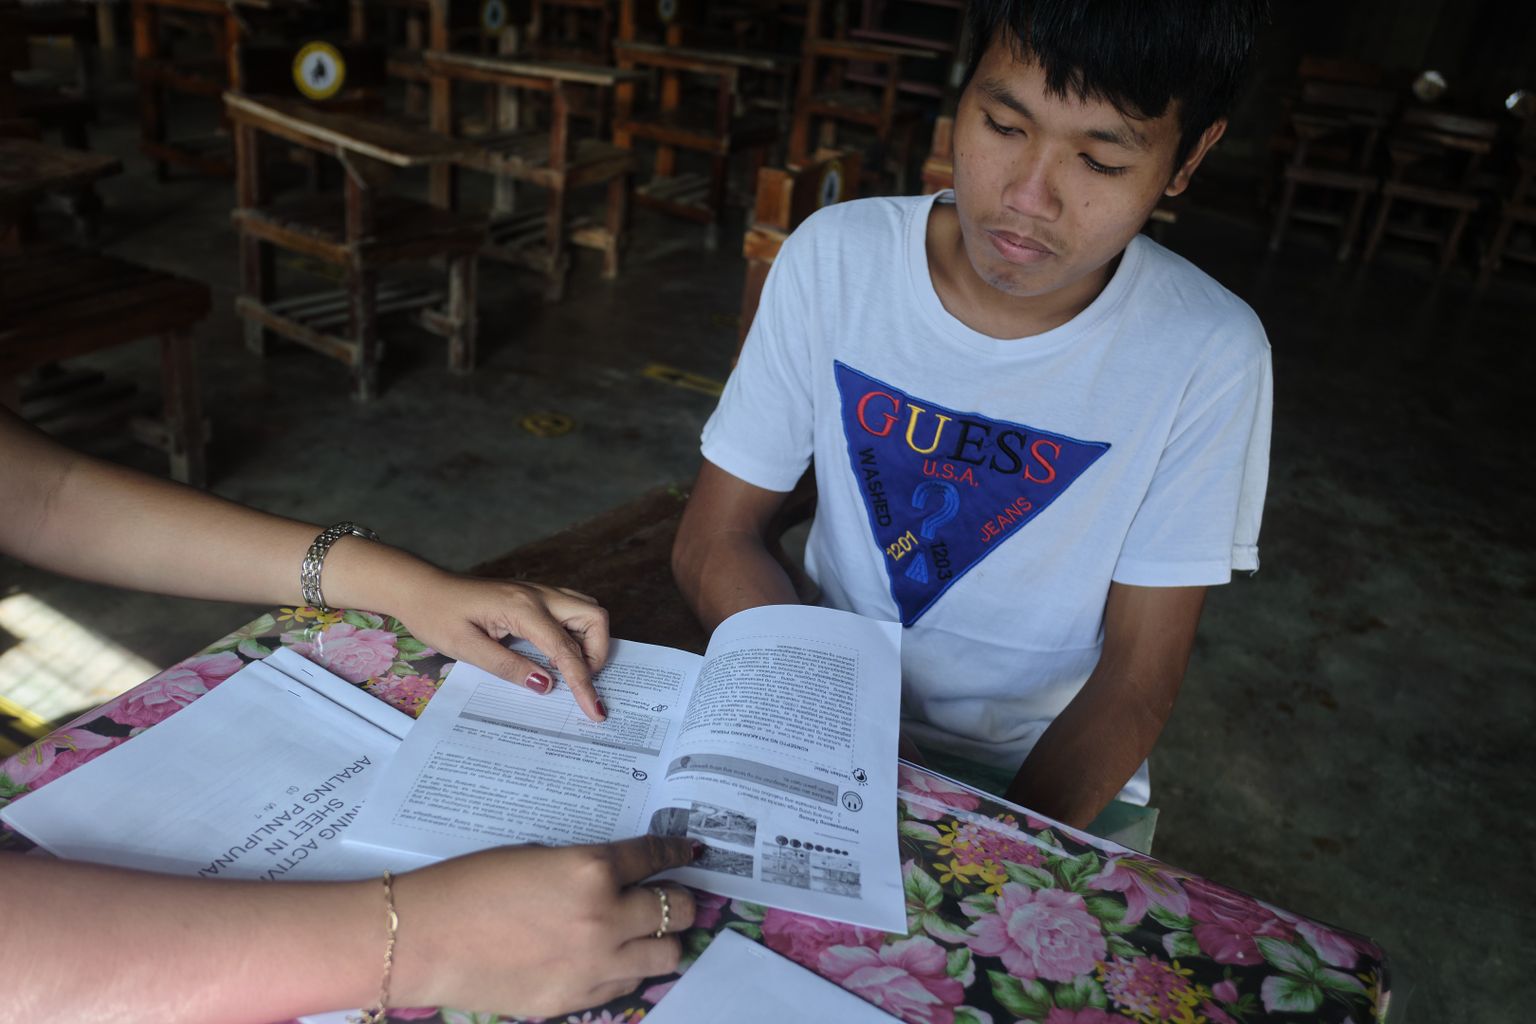 Eron’s teacher hands him his module. Eron goes to school only once a week as most schools in the Philippines remain closed from face-to-face classes due to the pandemic.